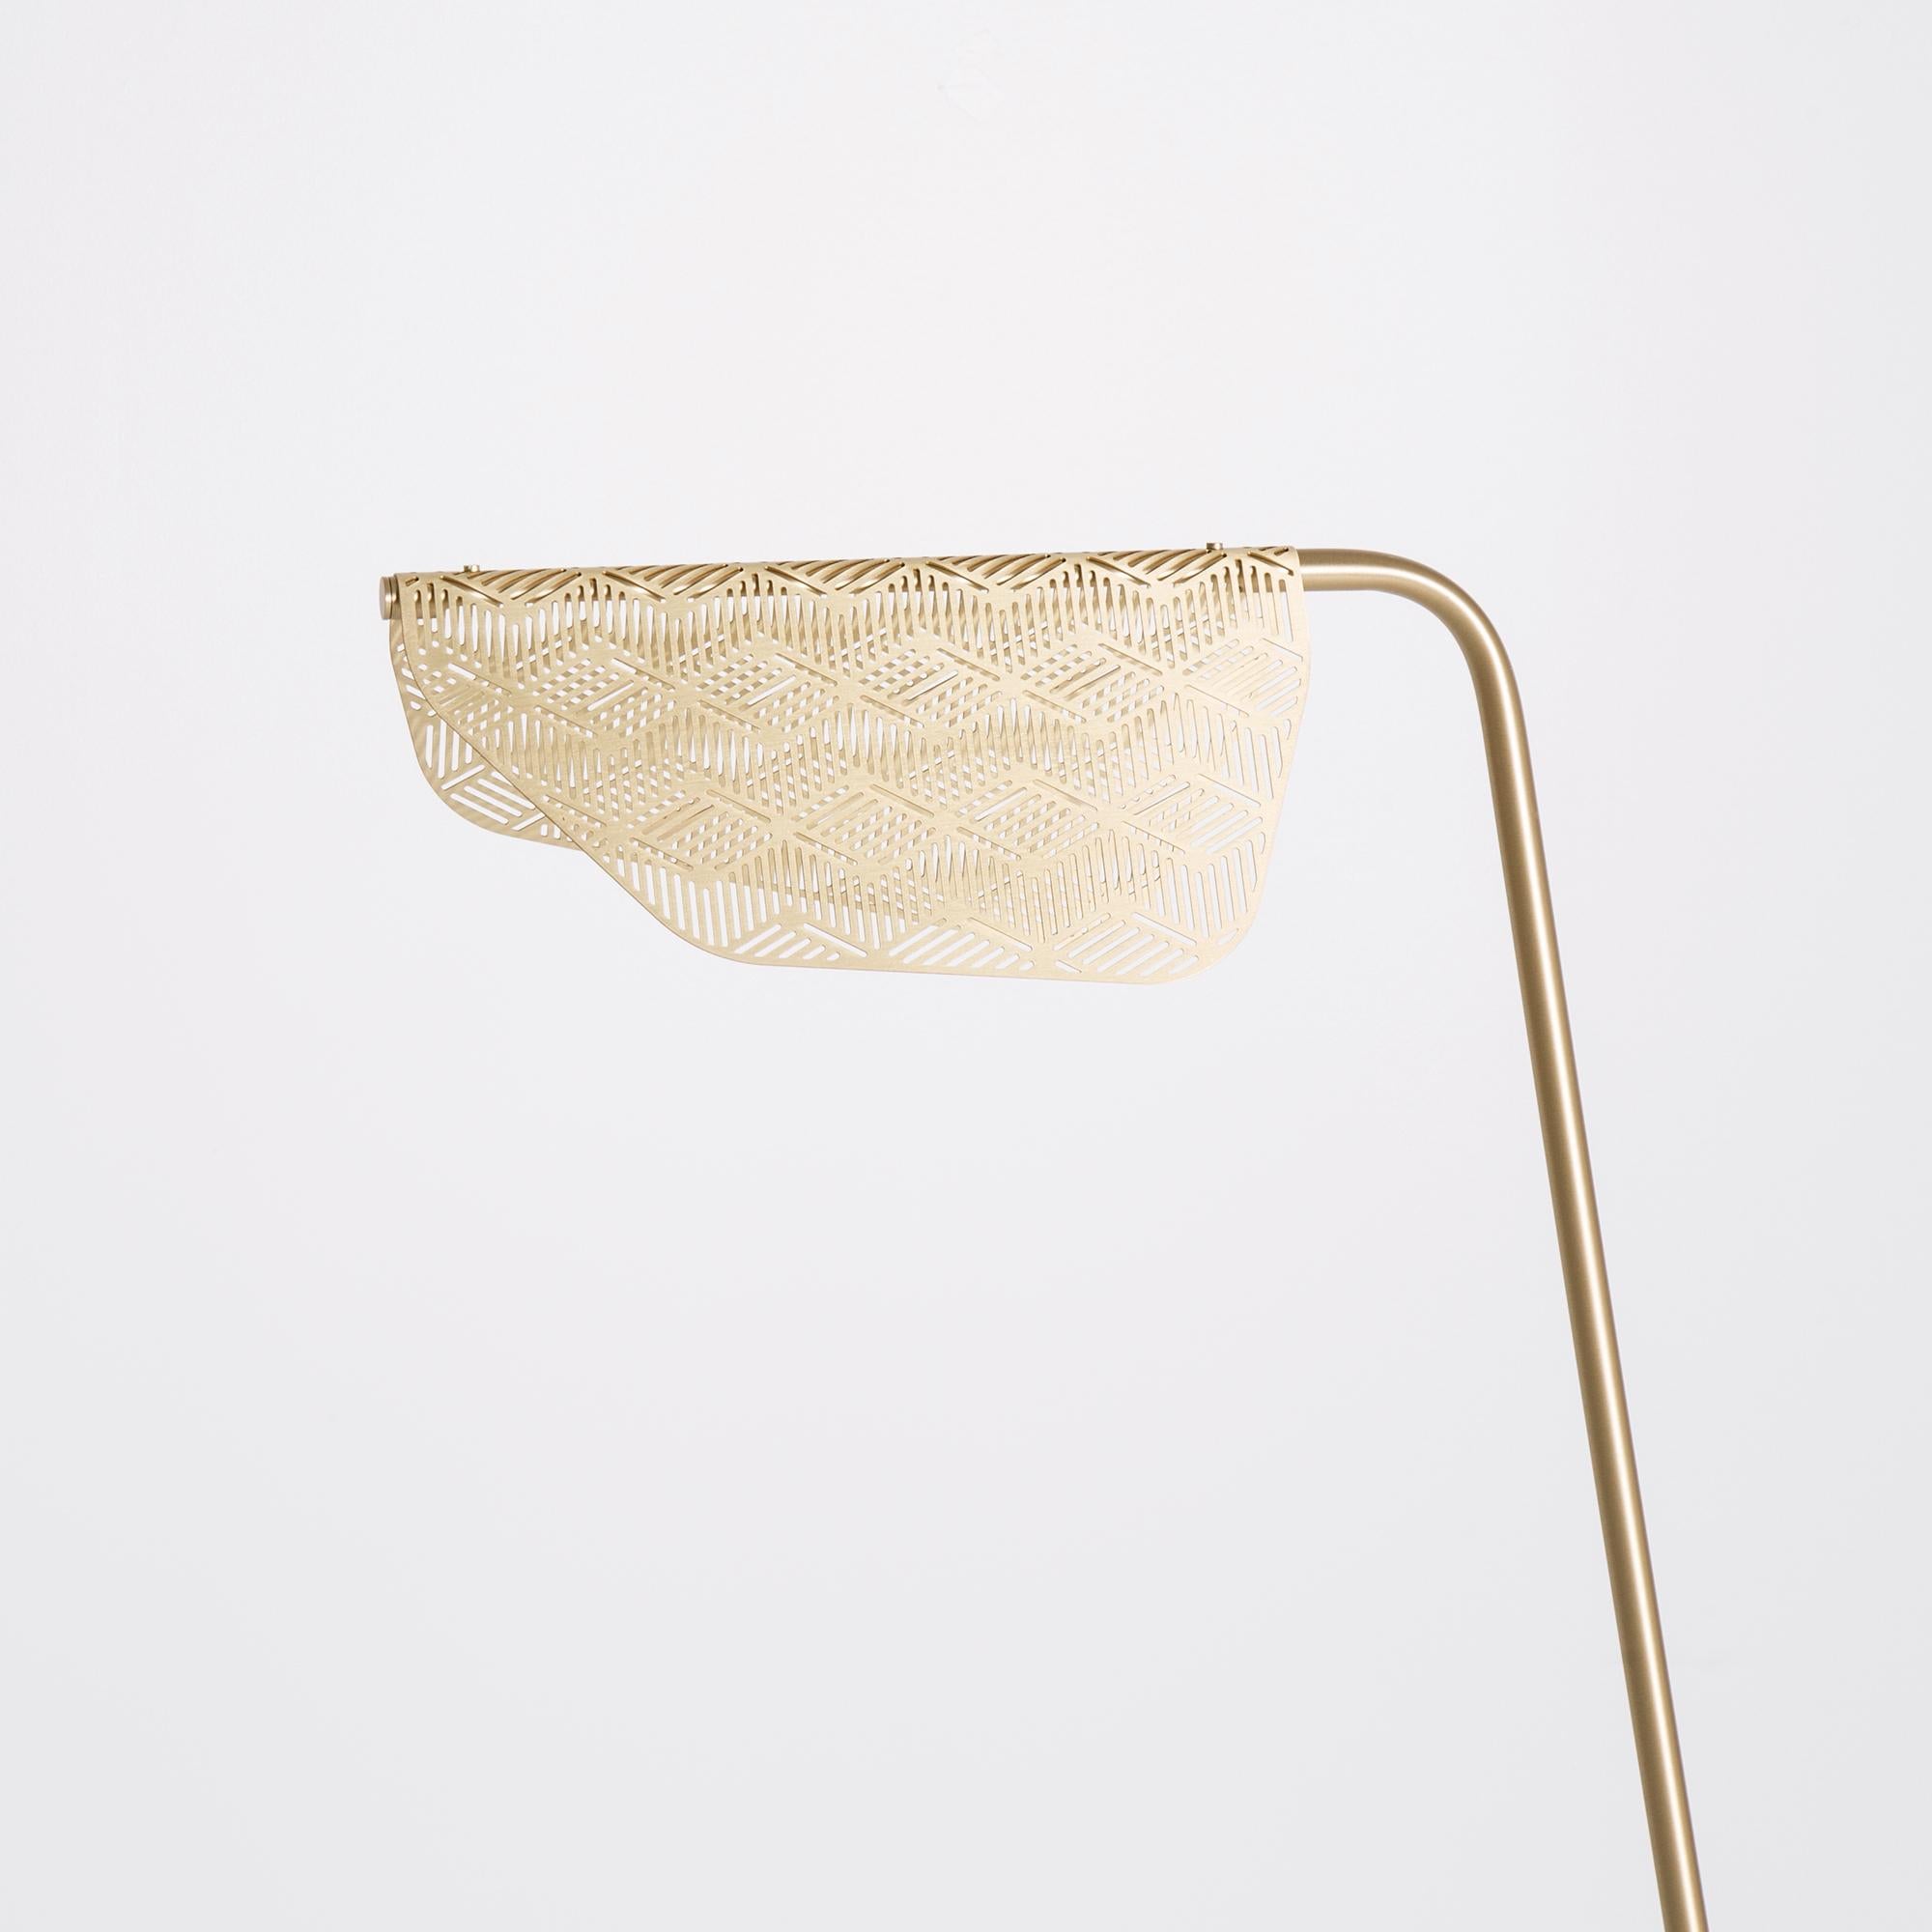 French Petite Friture Mediterranea Floor Lamp in Brass by Noé Duchaufour-Lawrance, 2016 For Sale